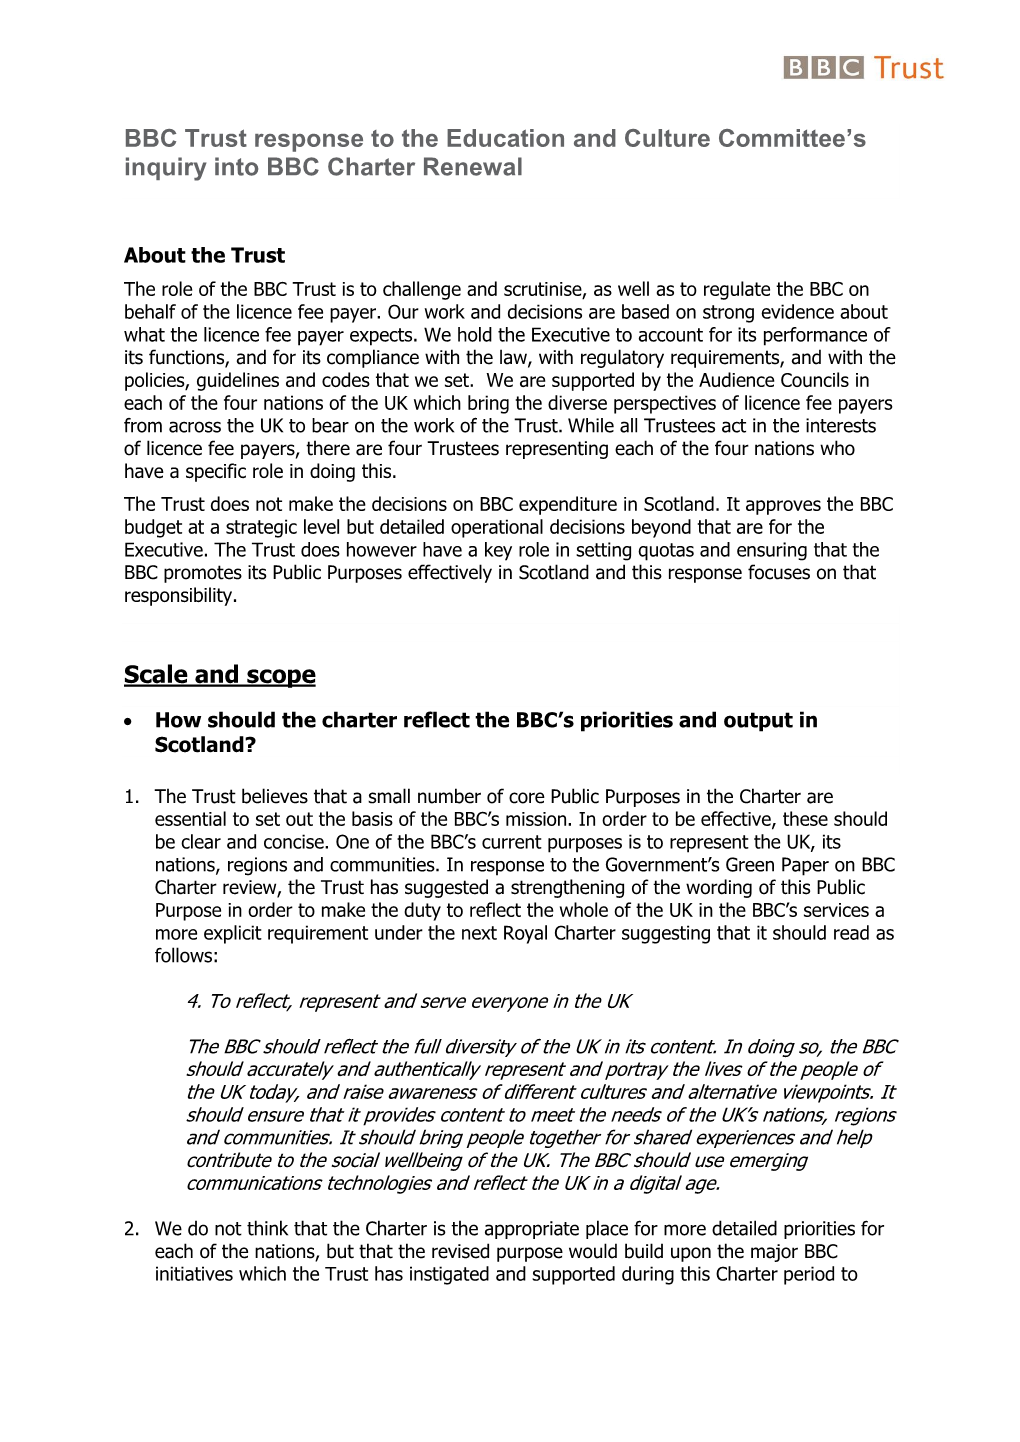 BBC Trust Response to the Education and Culture Committee’S Inquiry Into BBC Charter Renewal